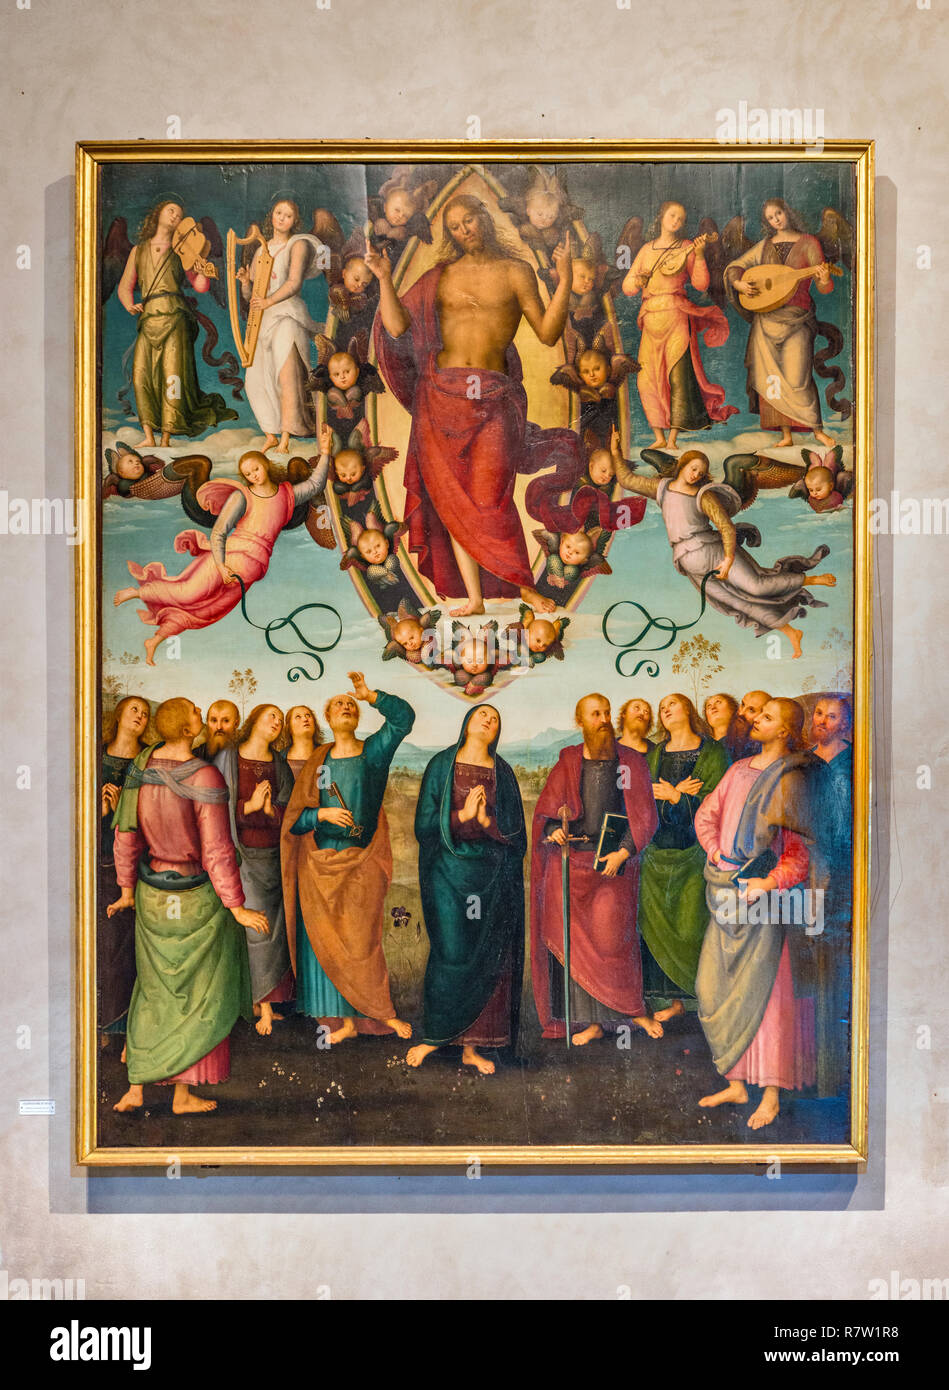 The Ascension of Christ (Ascensione di Gesu) aka Sansepolcro Altarpiece, by Perugino, around 1510, at Cathedral of Sansepolcro, Tuscany, Italy Stock Photo